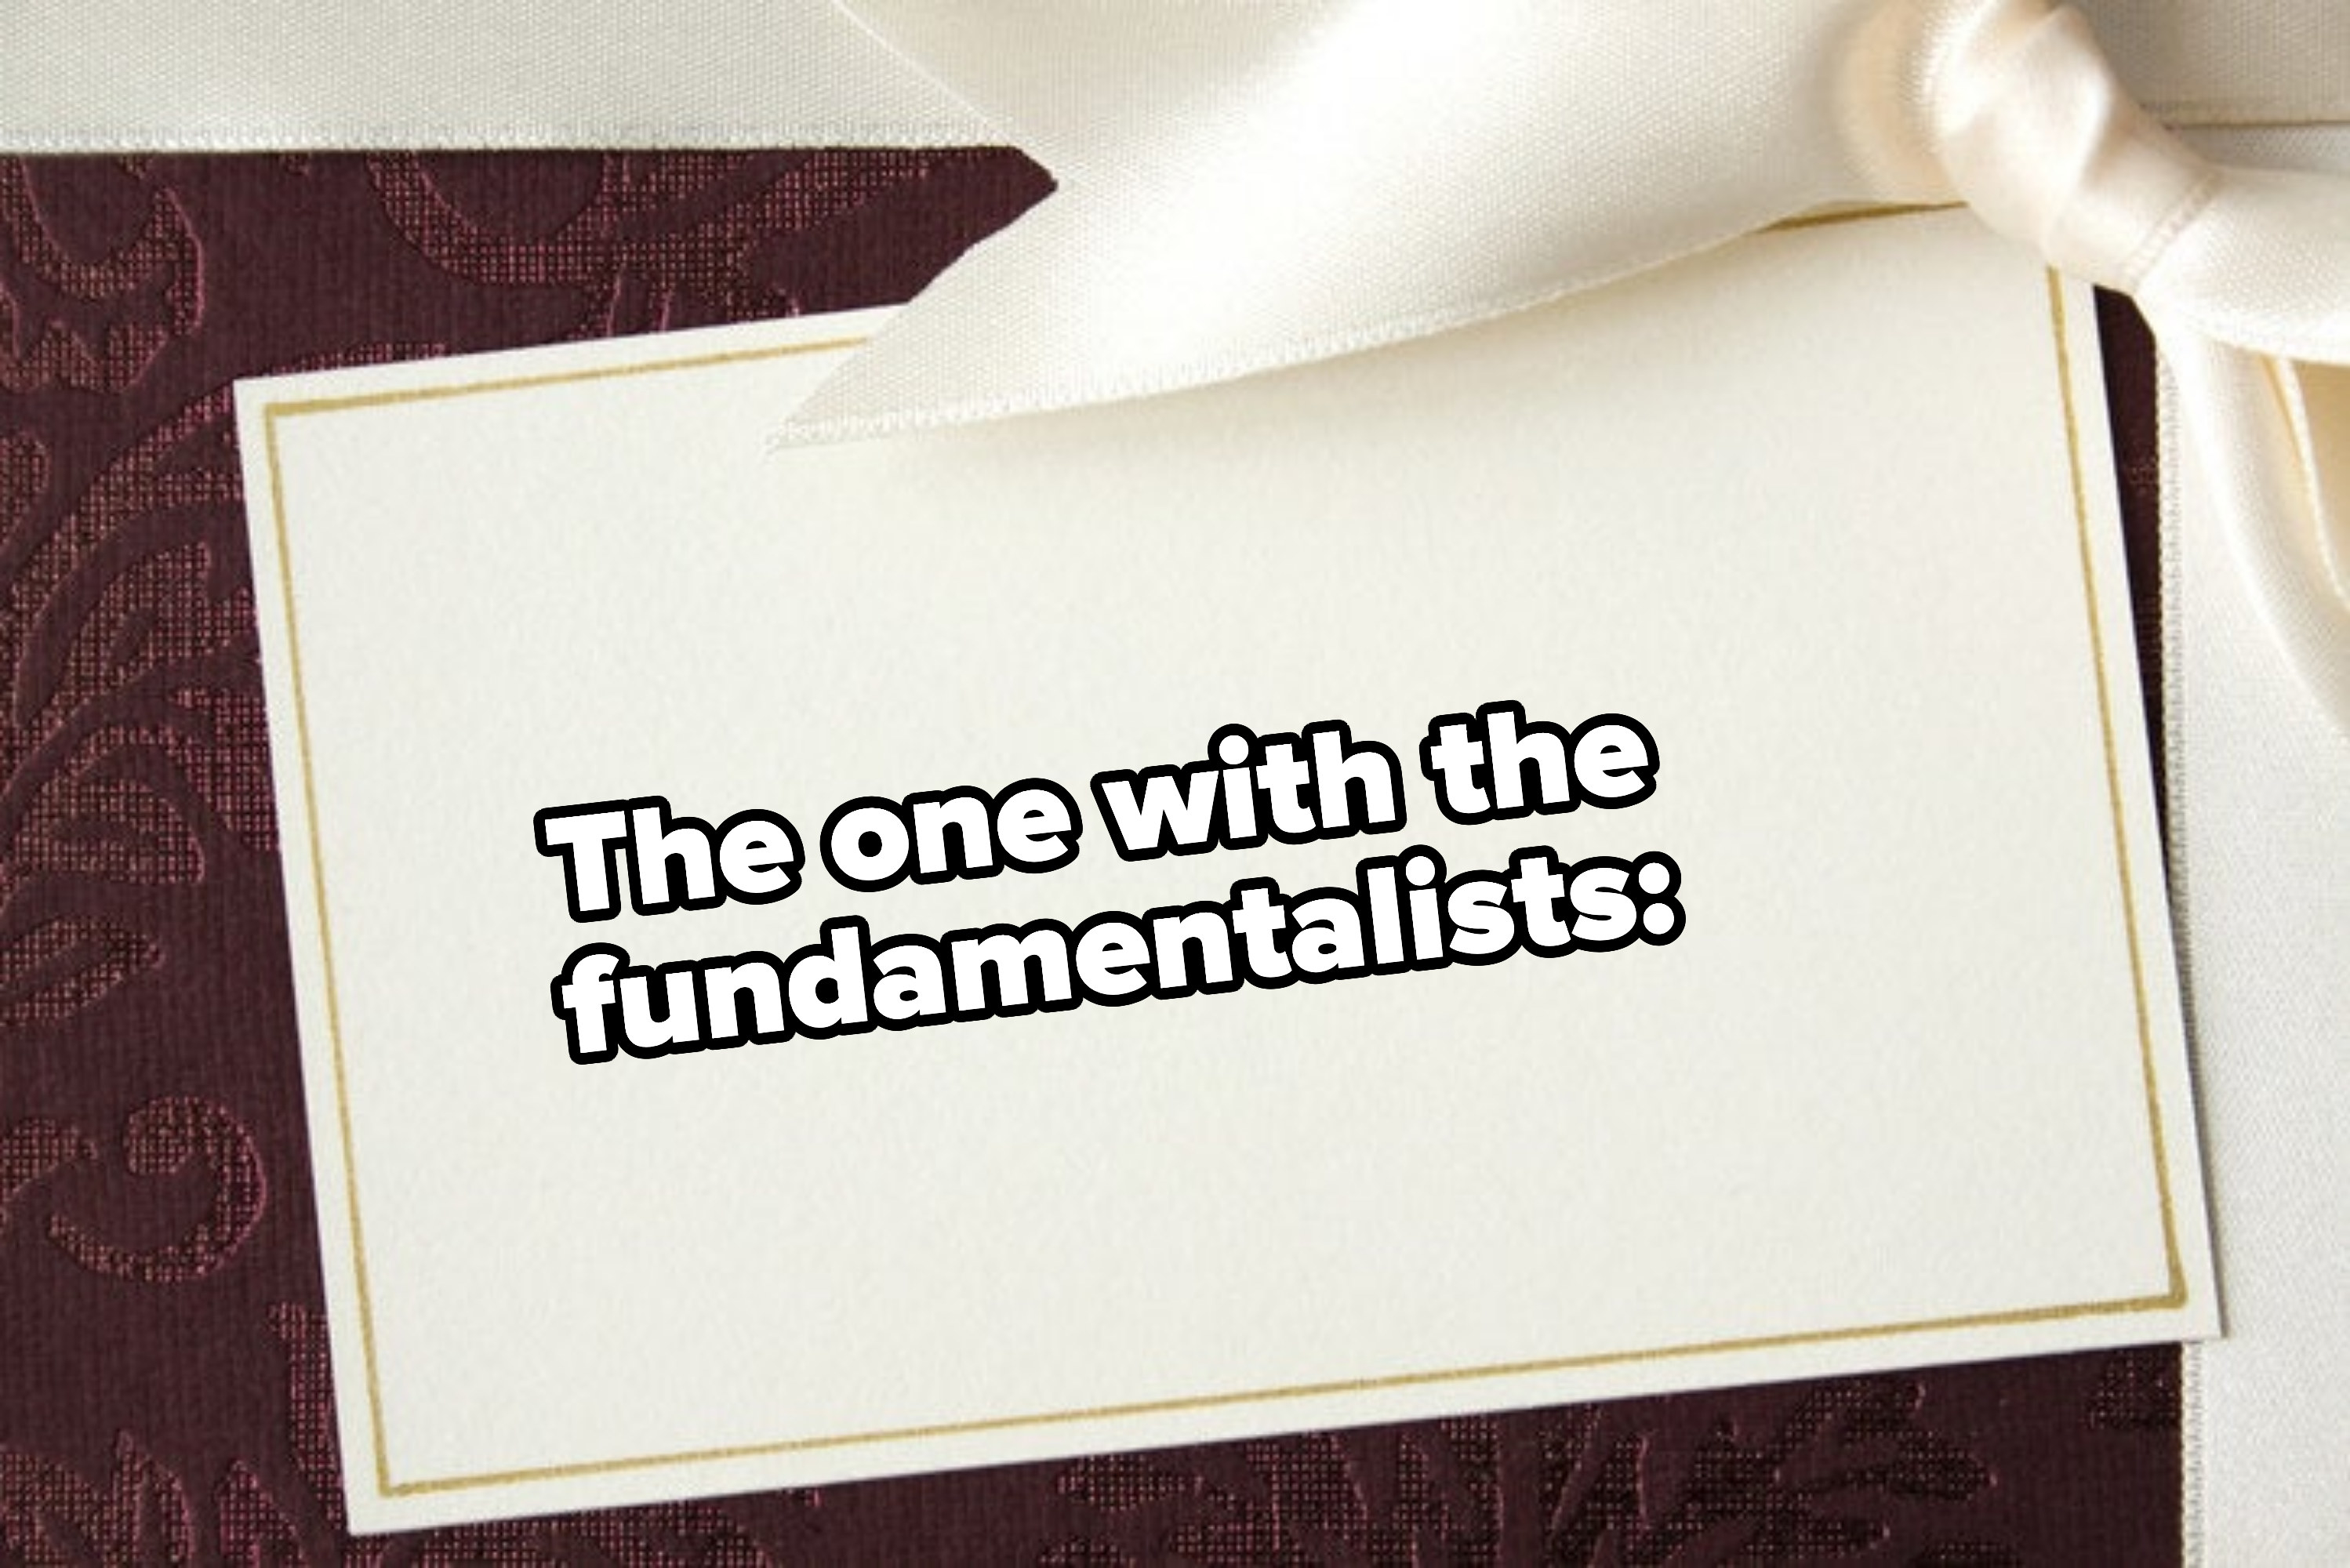 The one with the fundamentalists